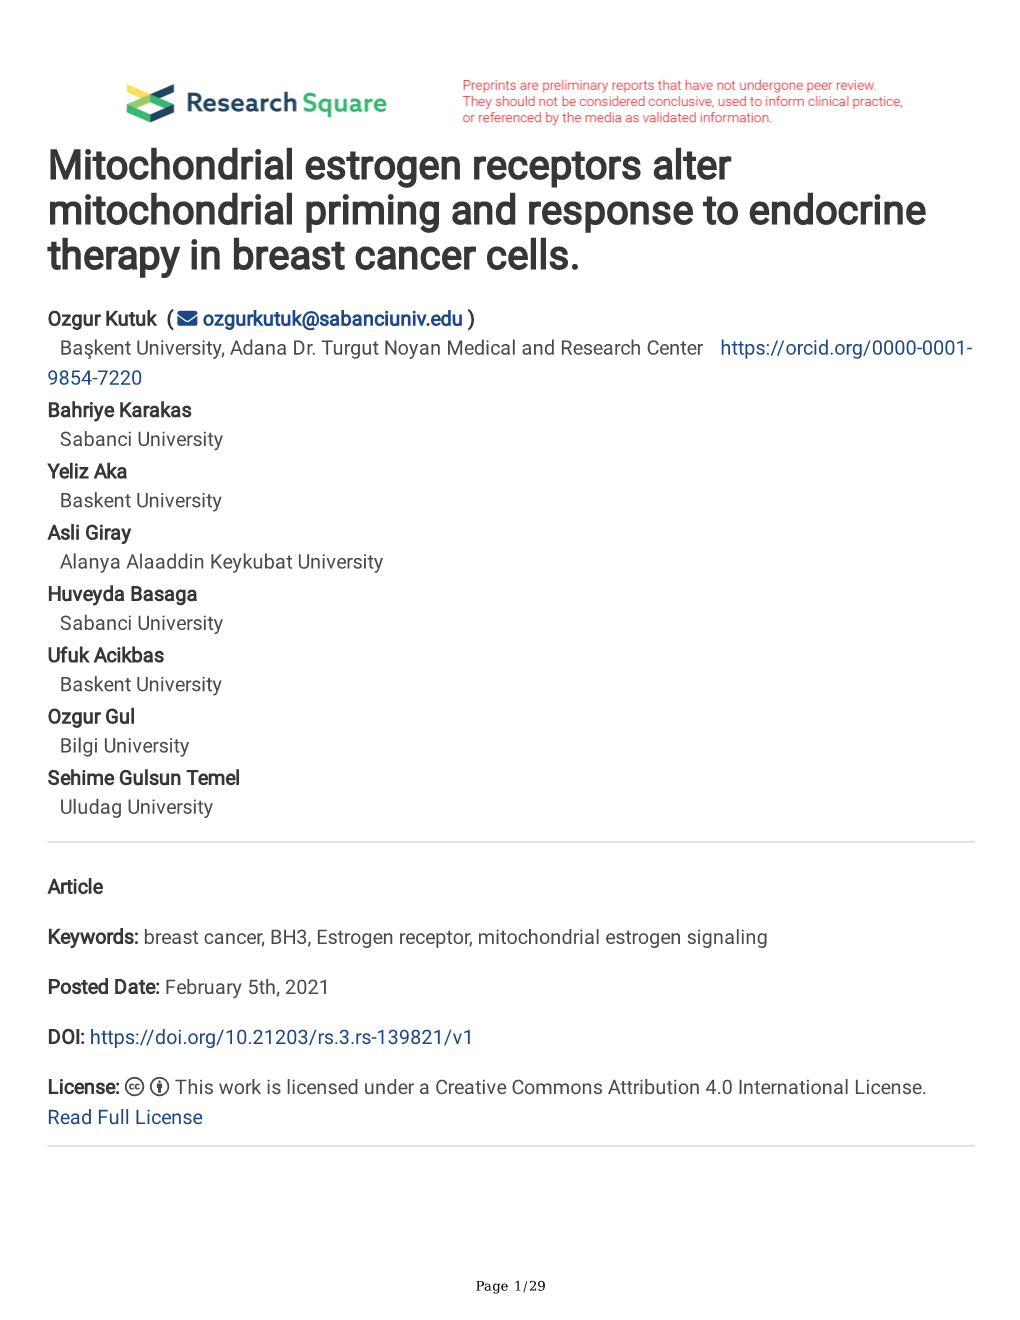 Mitochondrial Estrogen Receptors Alter Mitochondrial Priming and Response to Endocrine Therapy in Breast Cancer Cells